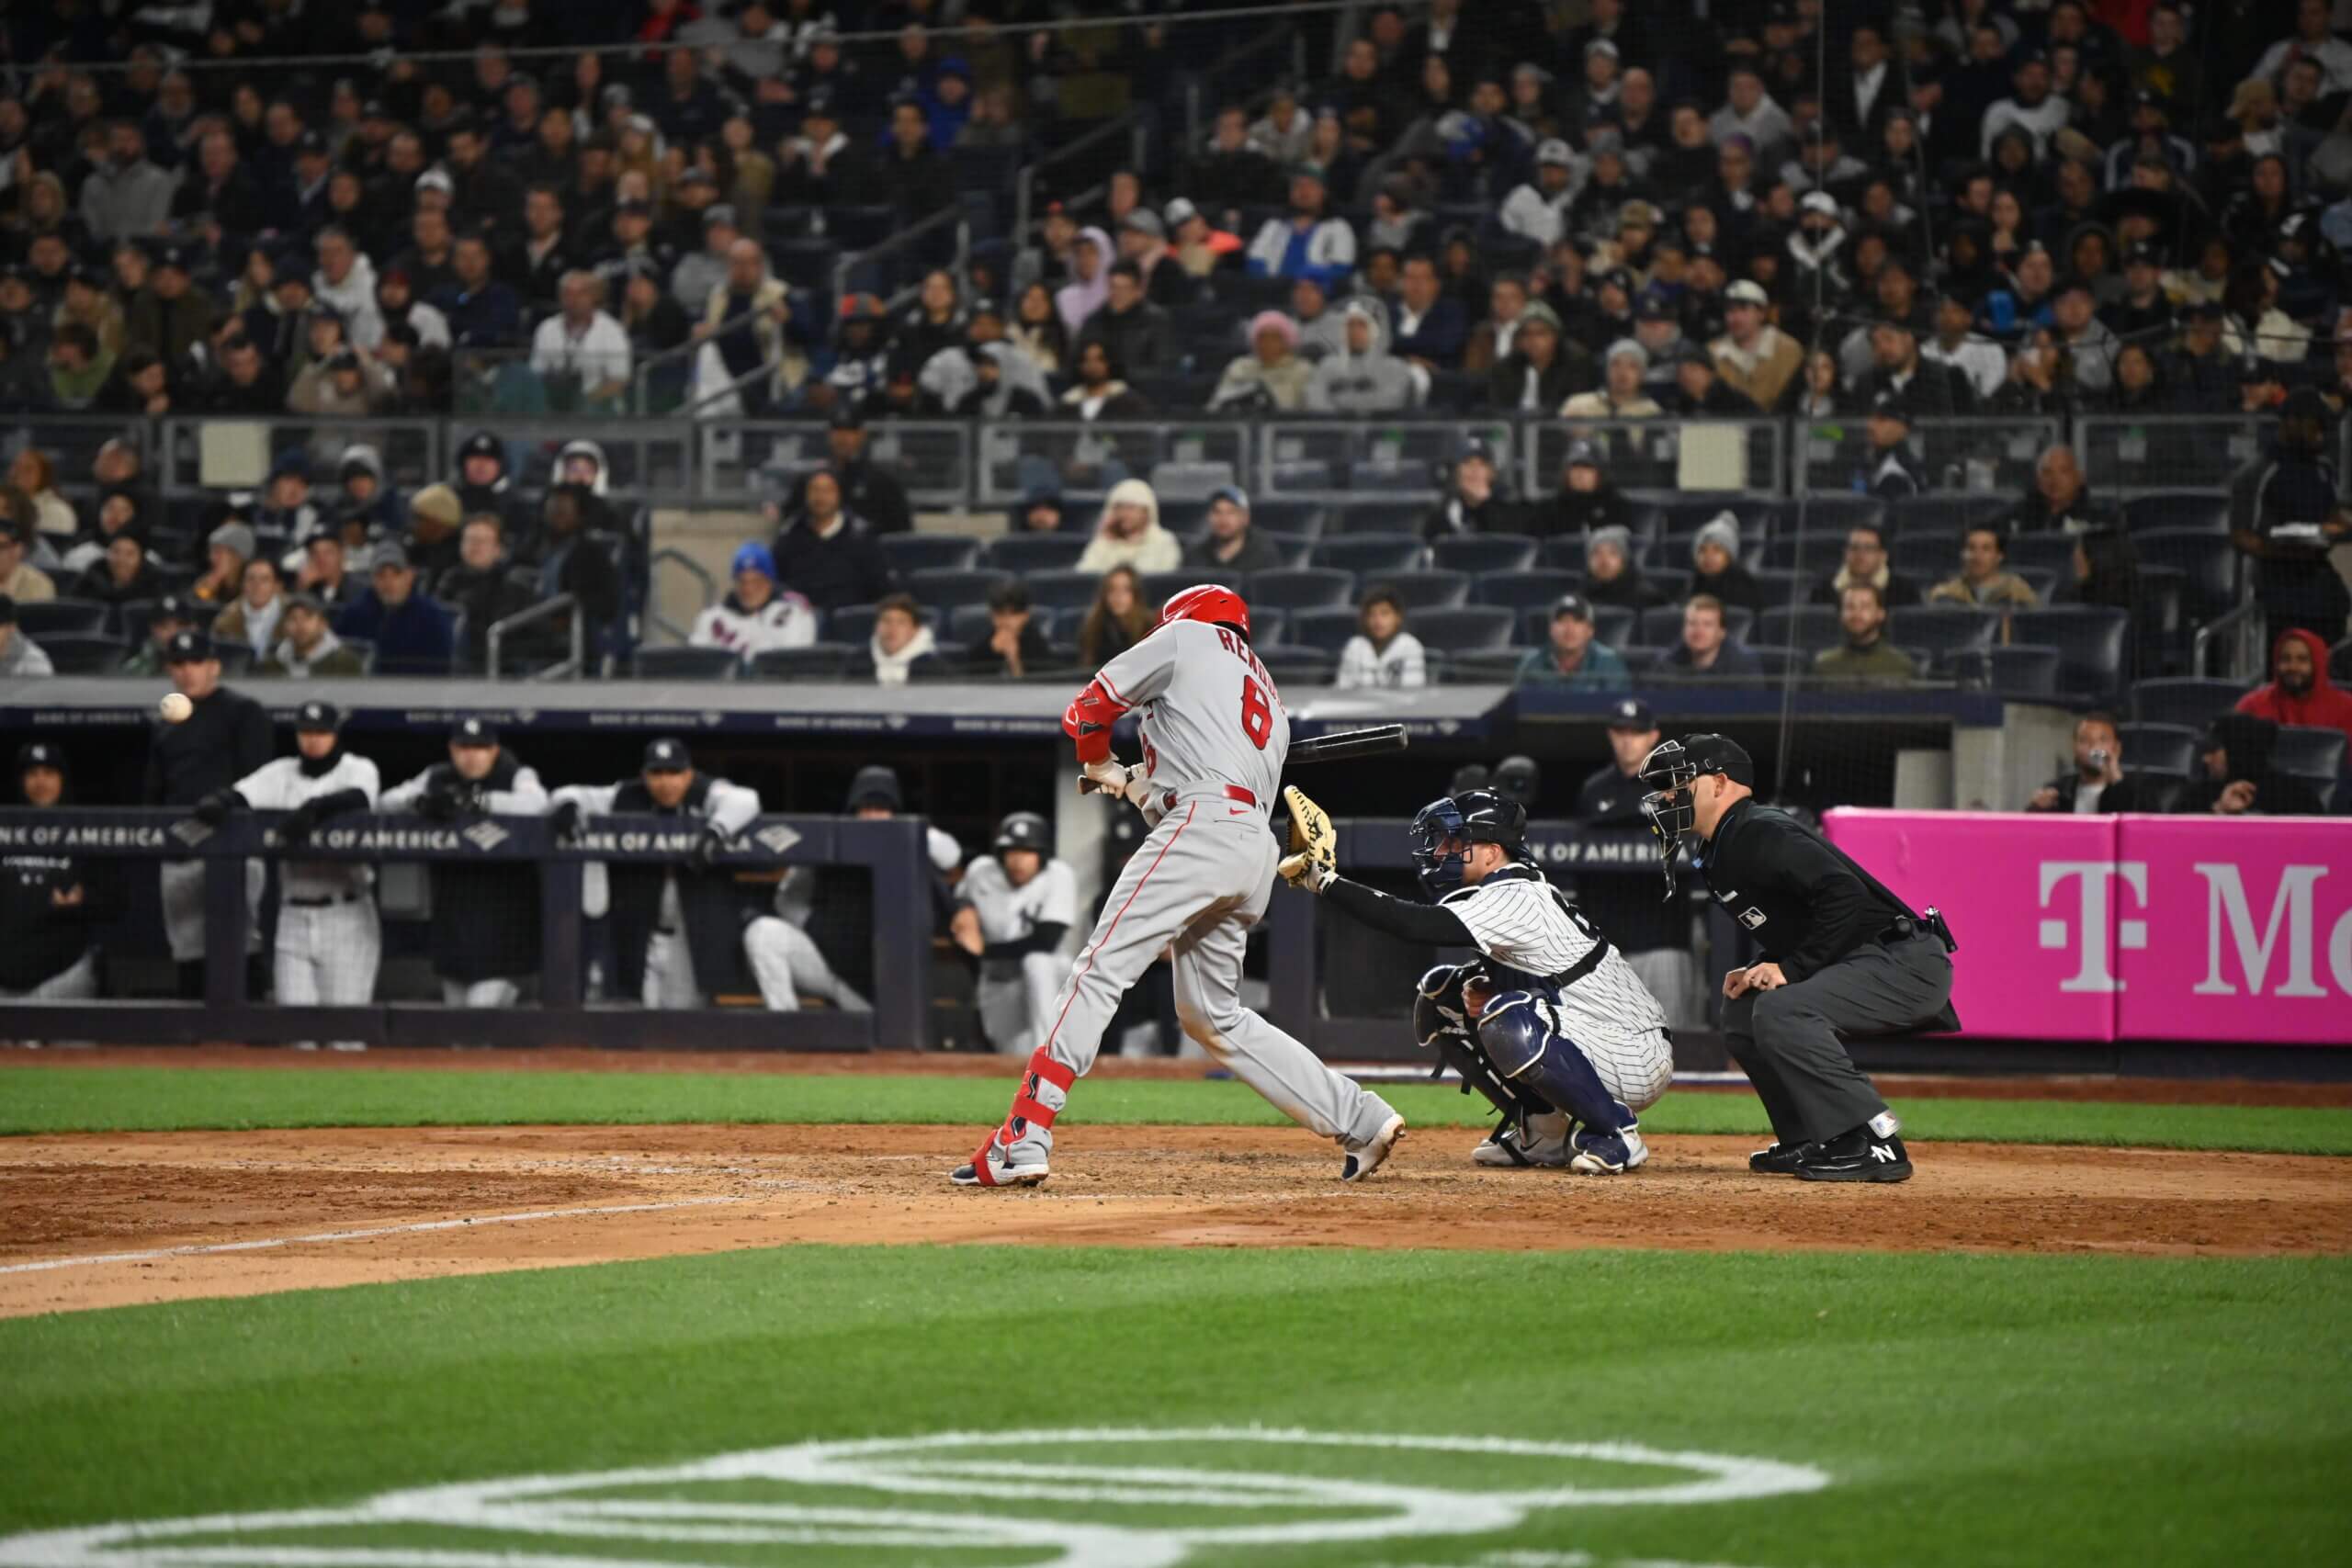 Los Angeles Angels' outfielder Brett Phillips at the plate during a game between the Yankees and Angels at Yankee Stadium on April 18, 2023.